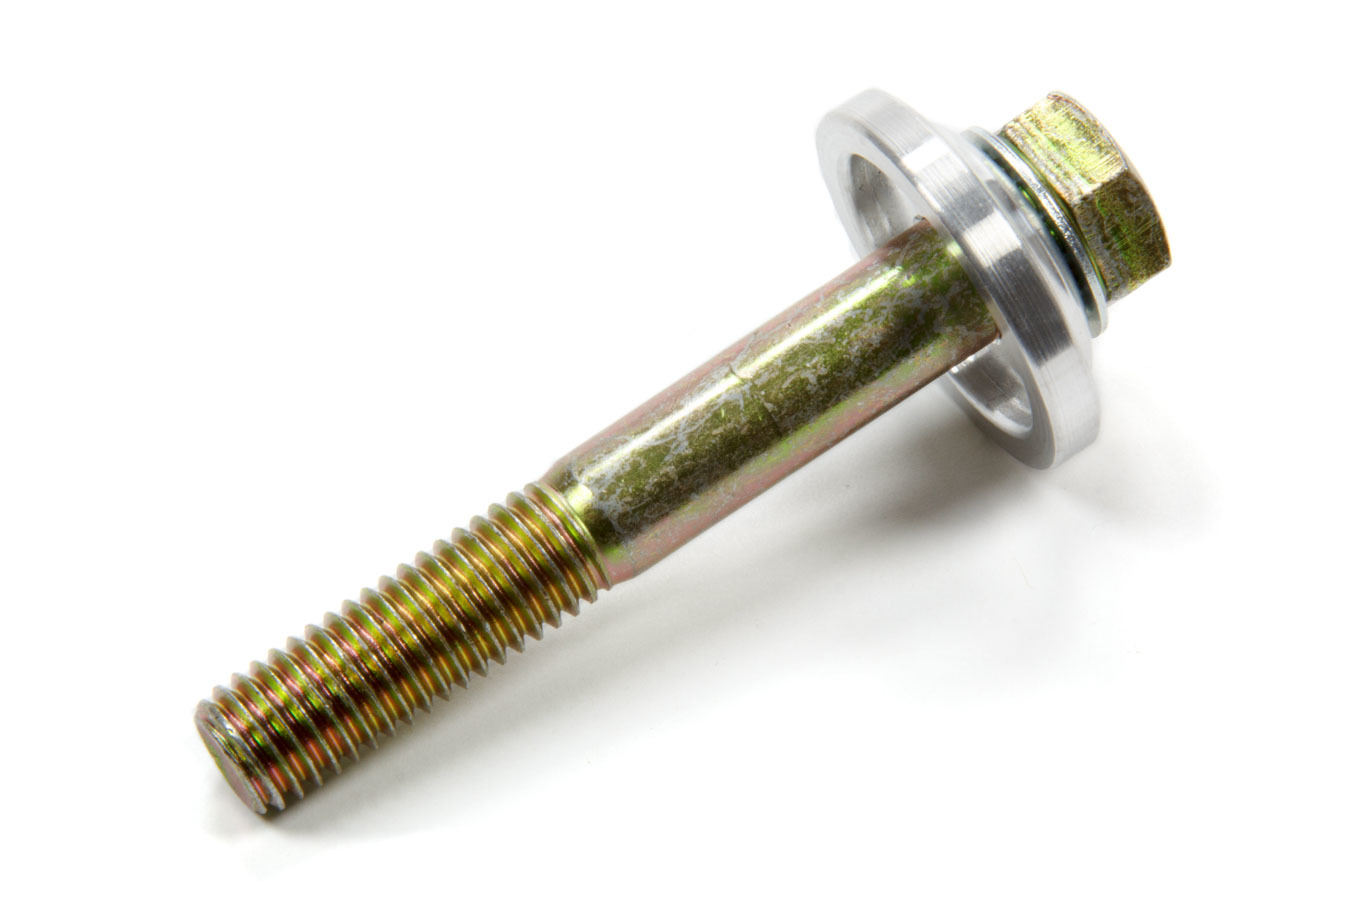 Jones Racing Products BEC-2109-HC Mandrel Drive Bolt, 1/2 in Bolt, 4.000 in Long, Hex Head, Step Washer, Steel, Each